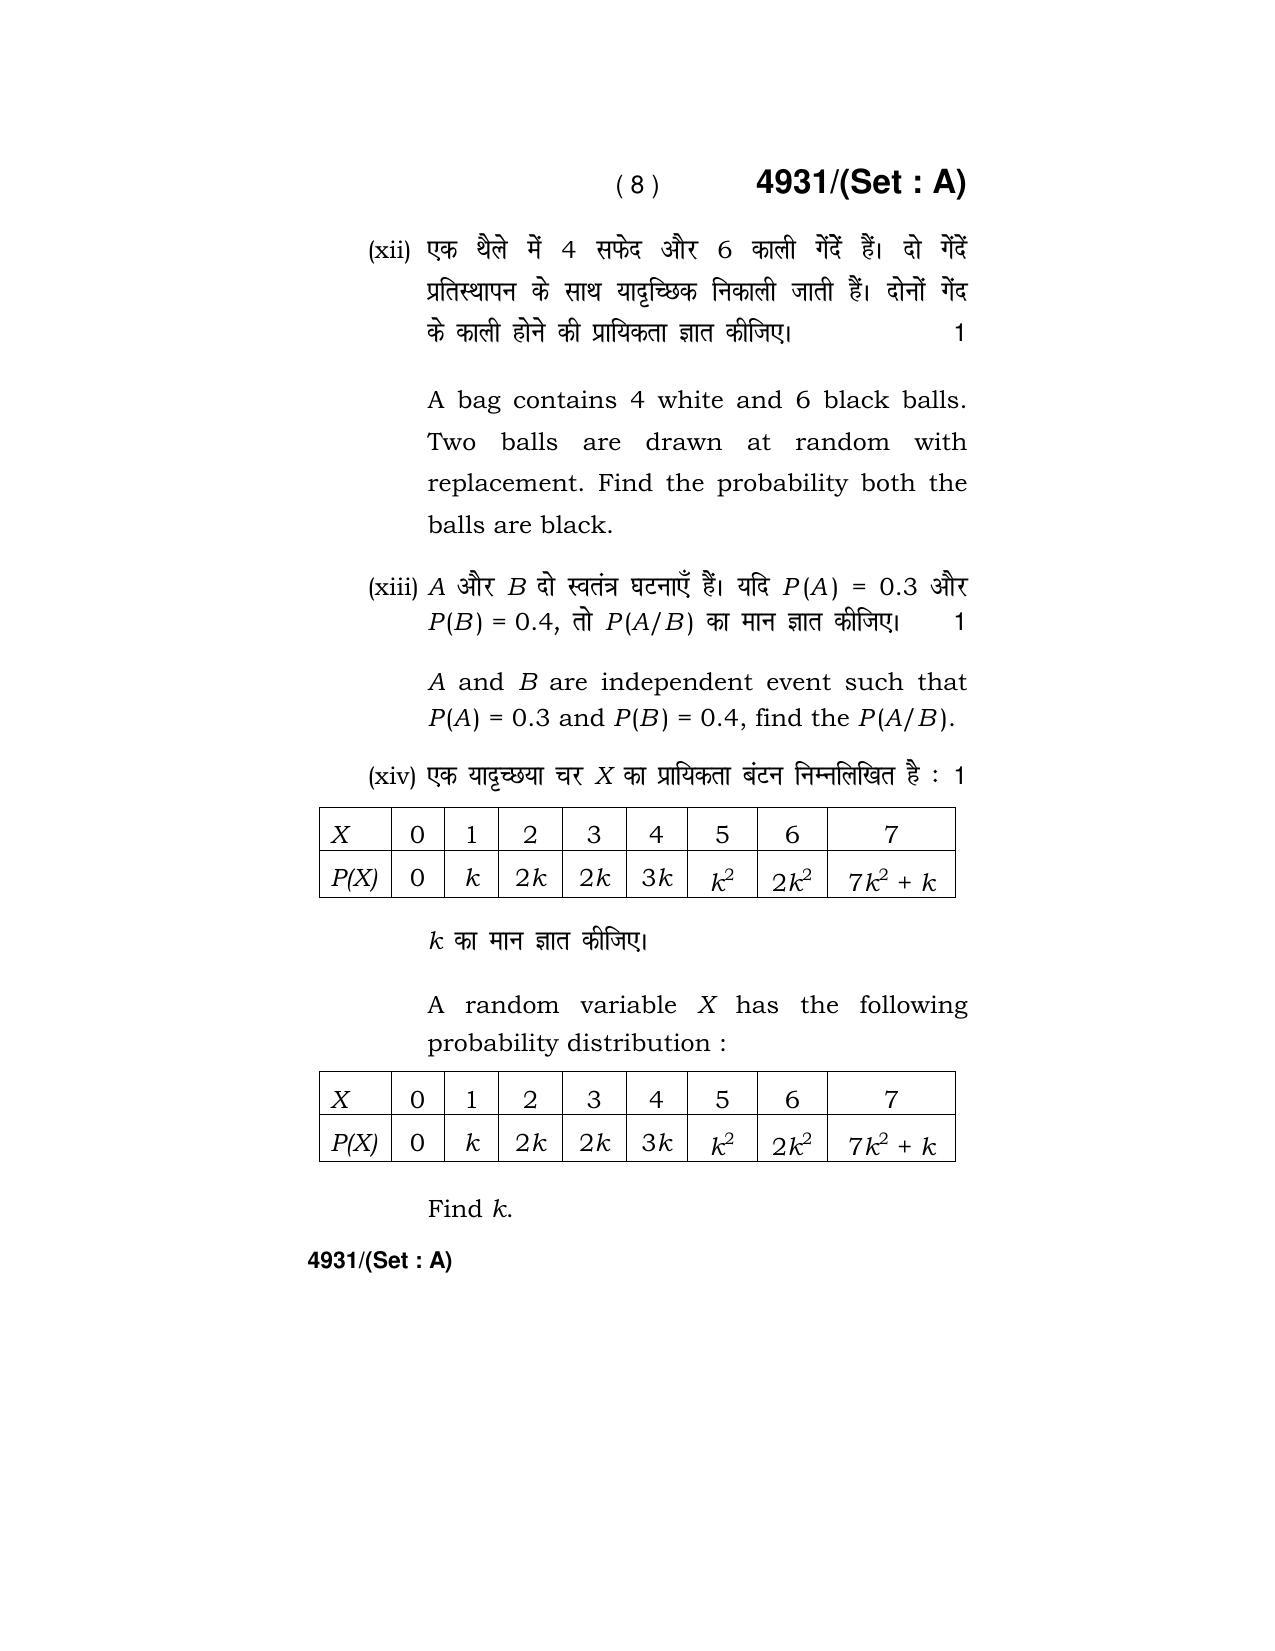 Haryana Board HBSE Class 12 Mathematics 2020 Question Paper - Page 8